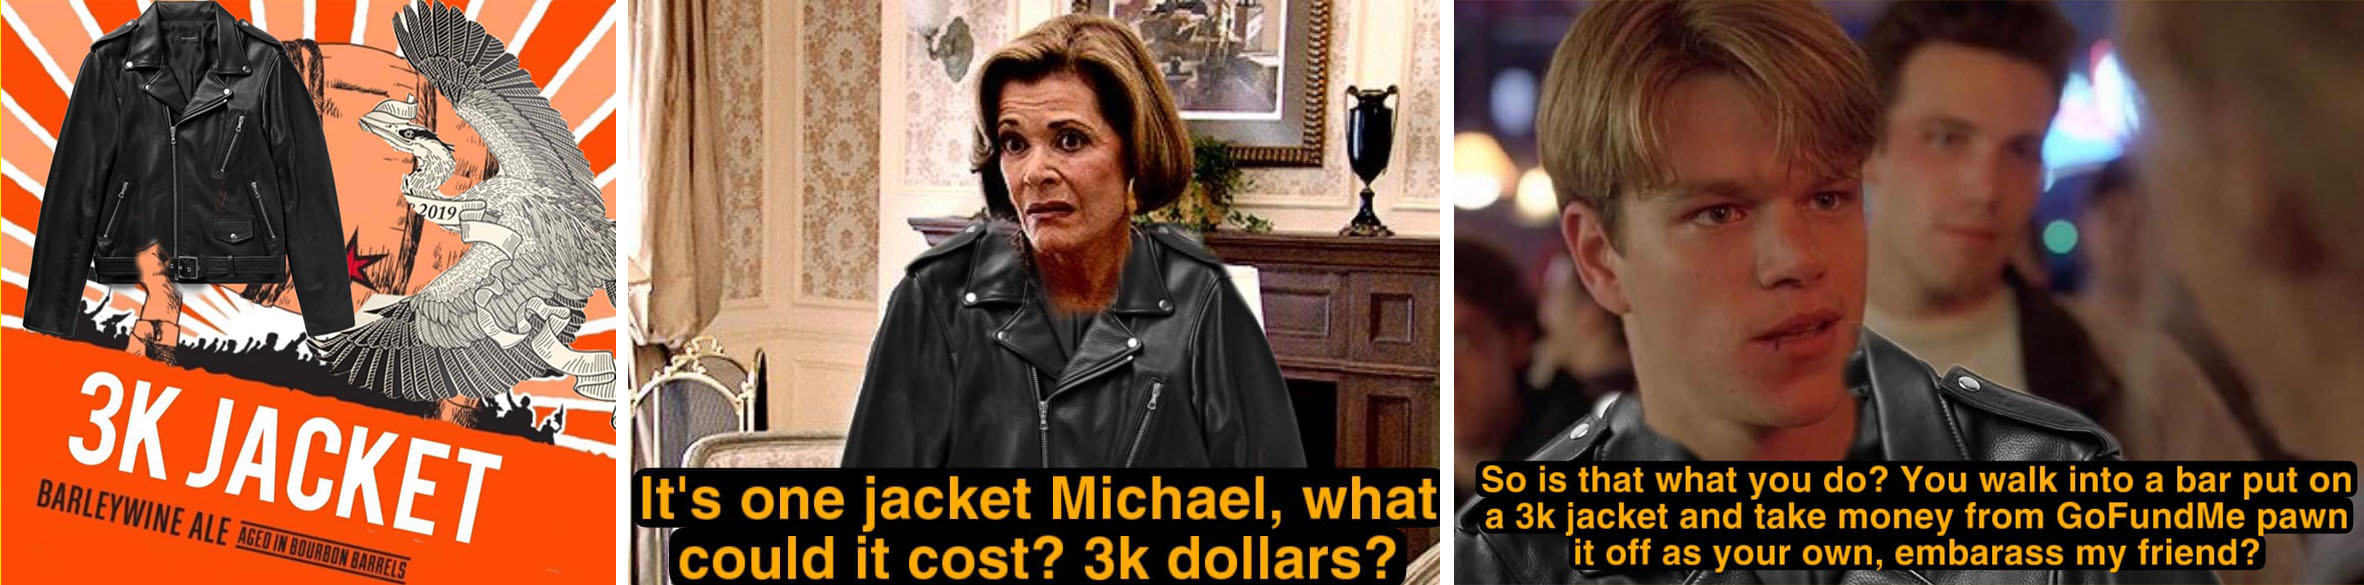 DDB Memes highlighting "jacket-gate" and the $3,000 jacket.